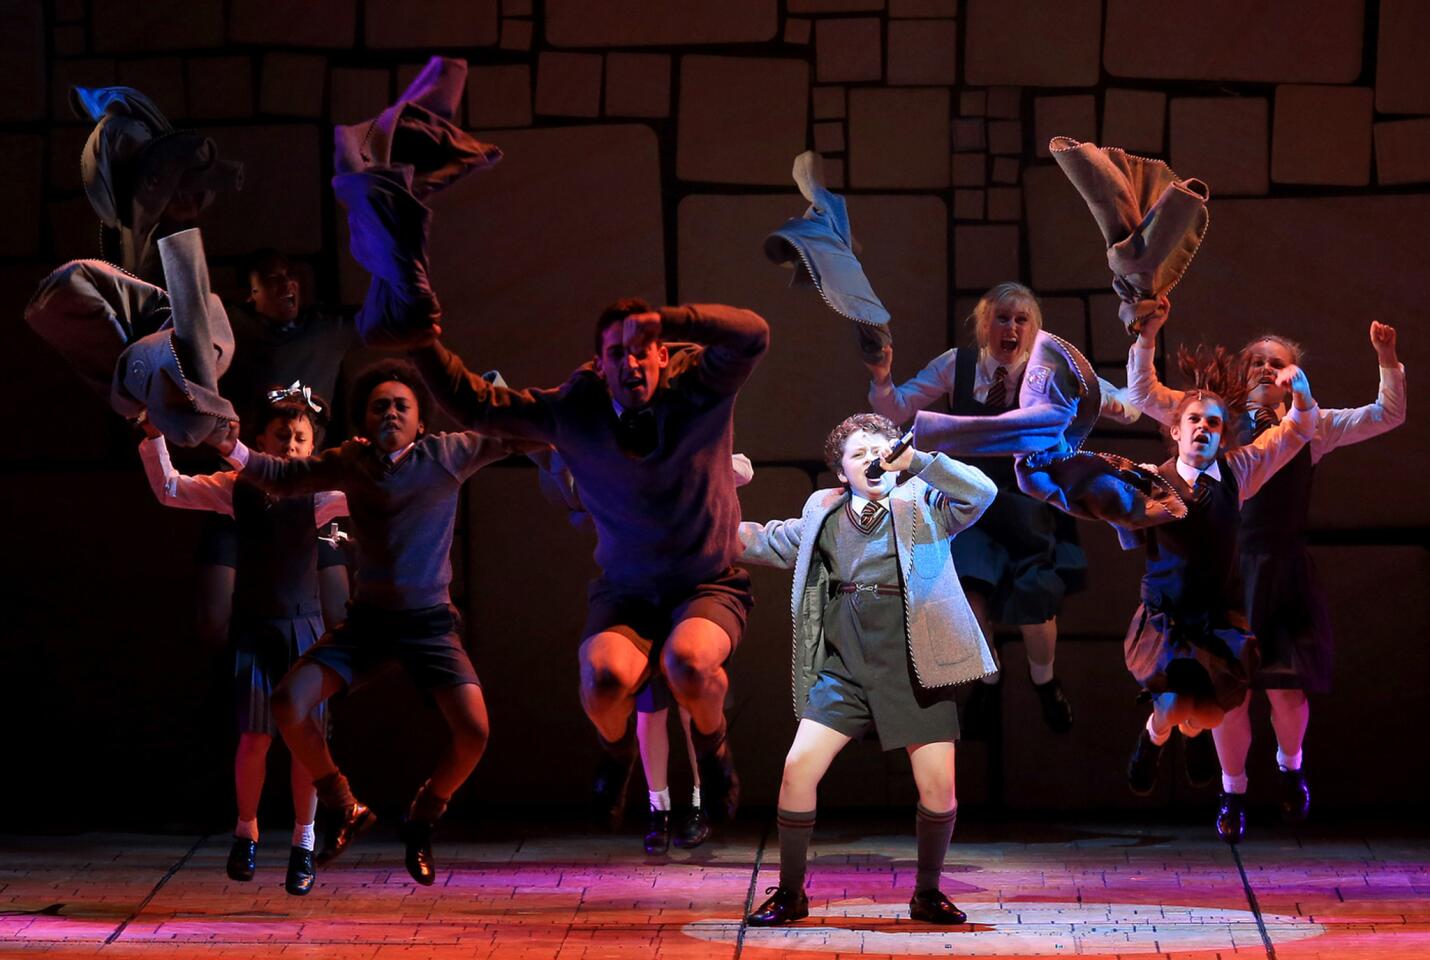 Evan Gray performs in "Matilda the Musical," based on the book by Roald Dahl and presented by the Royal Shakespeare Company and the Los Angeles Dodgers, playing at the Ahmanson Theatre.